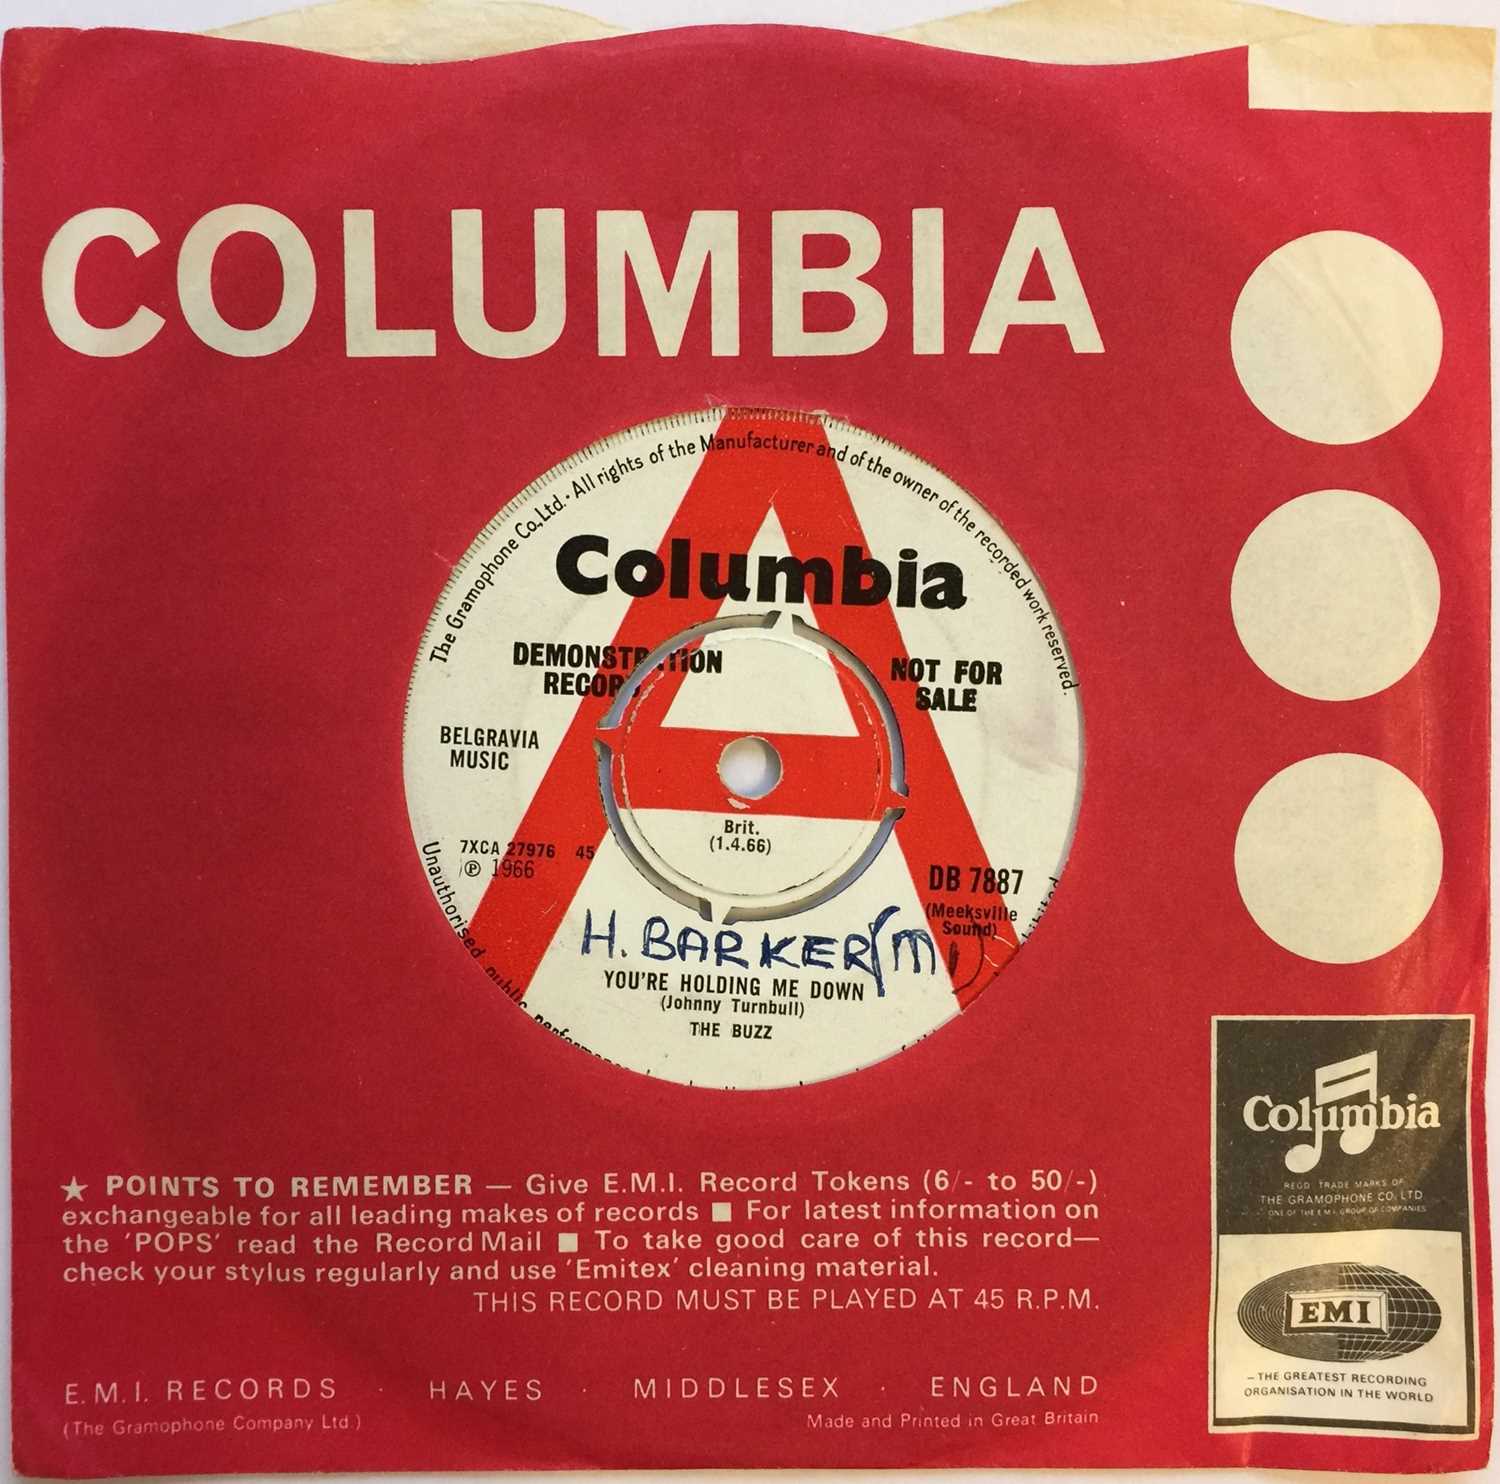 Lot 80 - THE BUZZ - YOU'RE HOLDING ME DOWN 7" (ORIGINAL UK DEMO - COLUMBIA DB 7887)